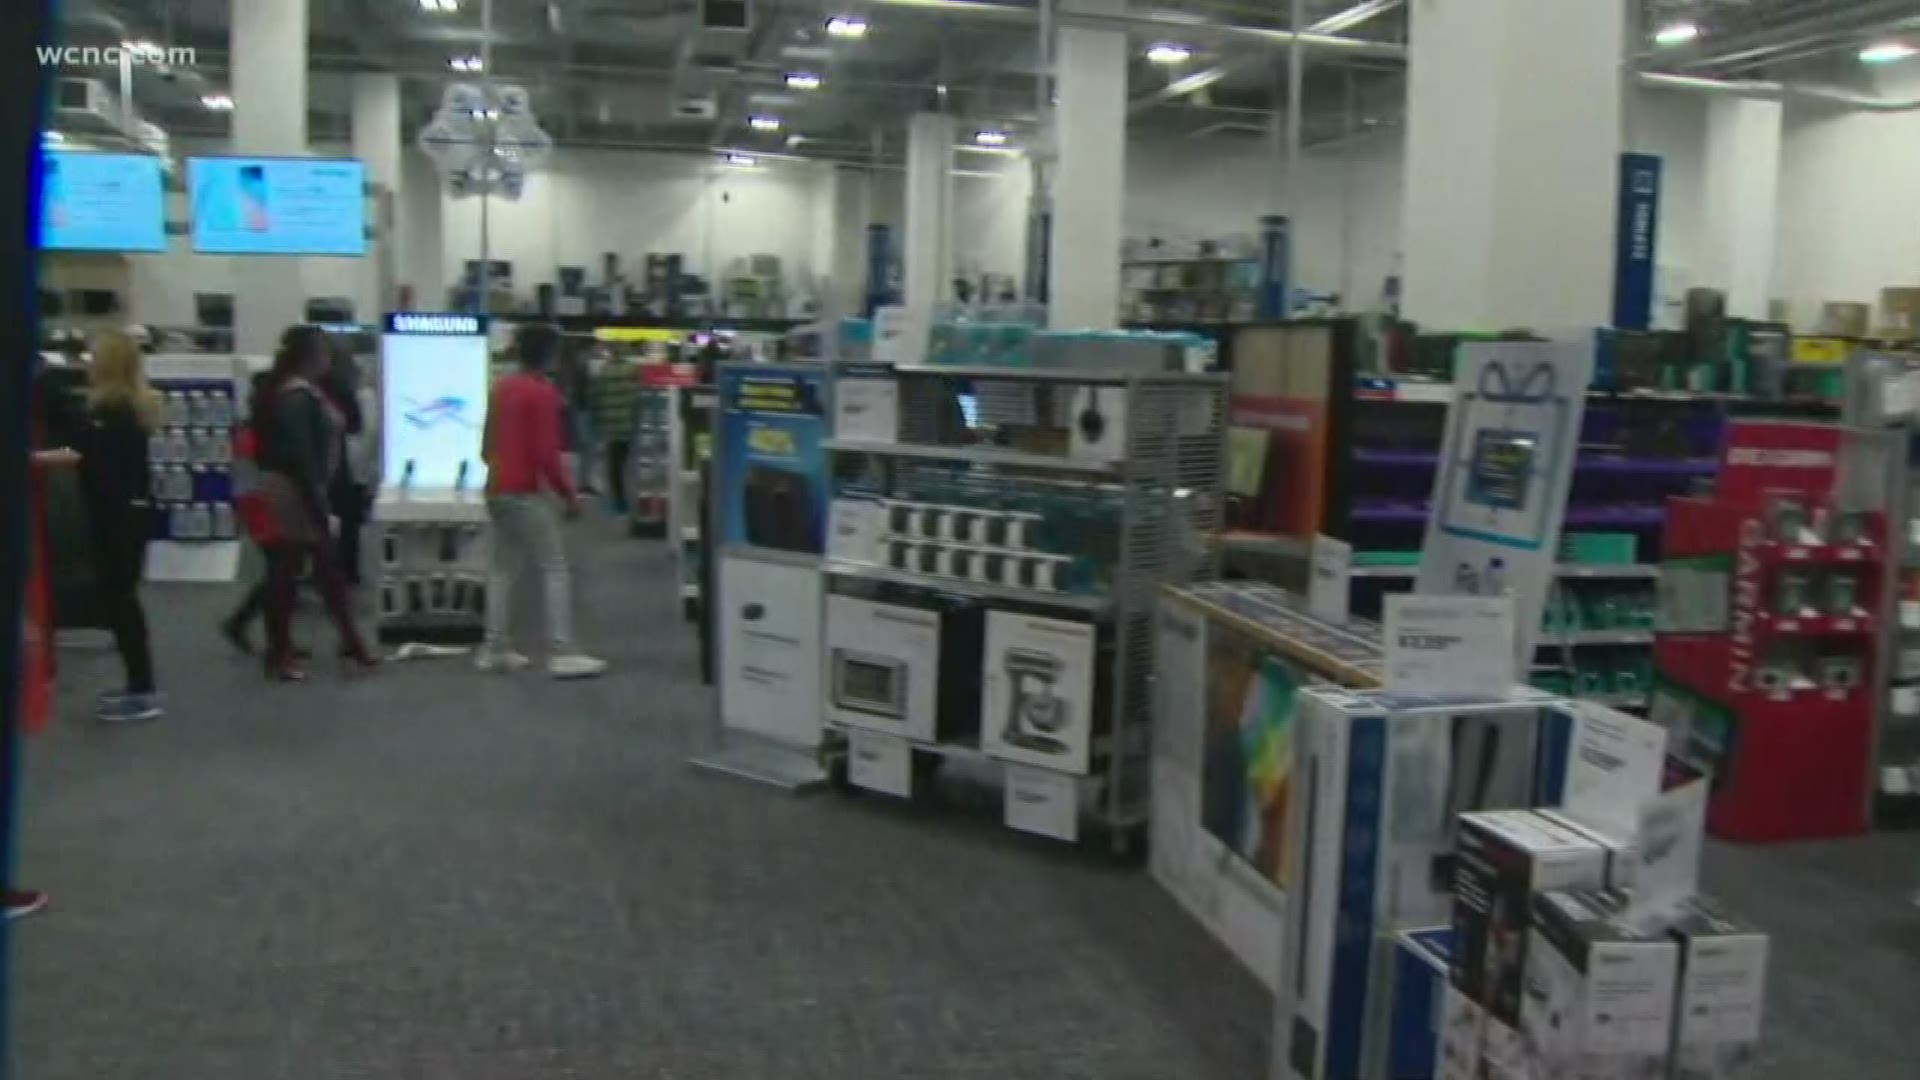 Starting at 5 p.m. Thanksgiving Day, multiple stores in the Queen City opened early for "Black Friday" deals.